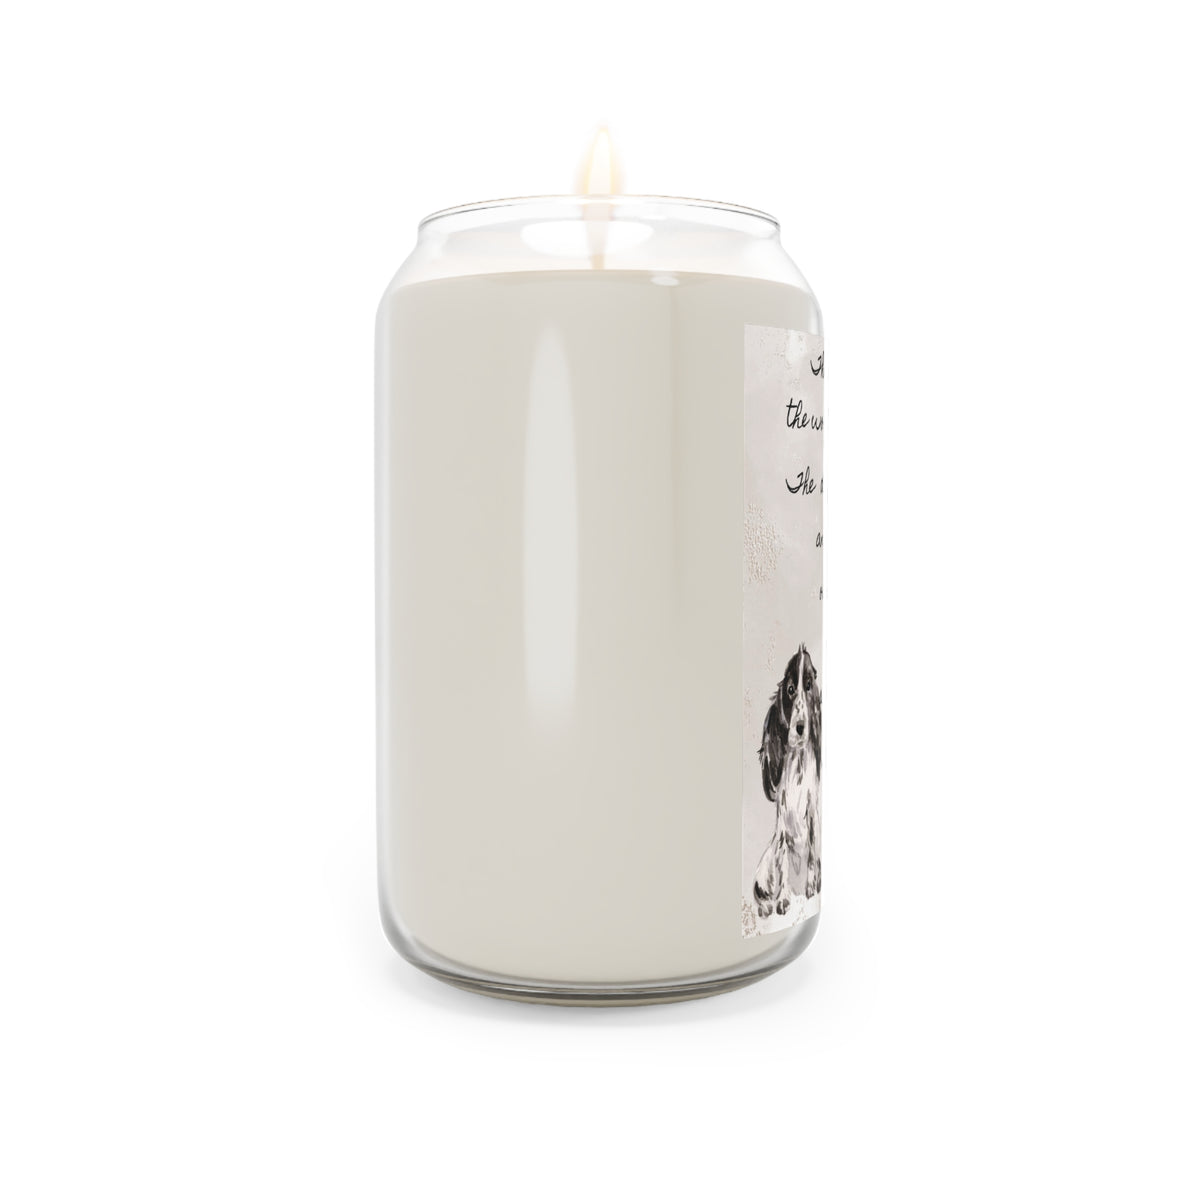 The Day Cocker Spaniel Black Pet Memorial Scented Candle, 13.75oz